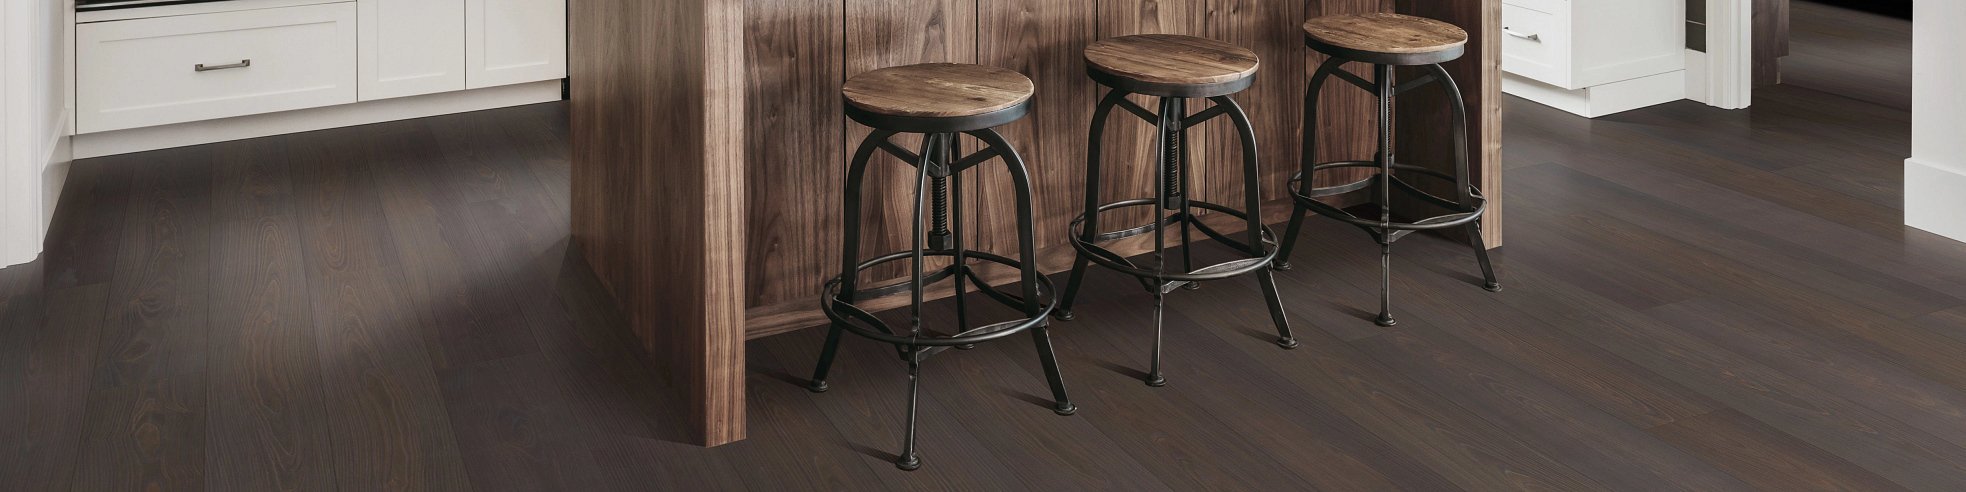 Stools From Morans